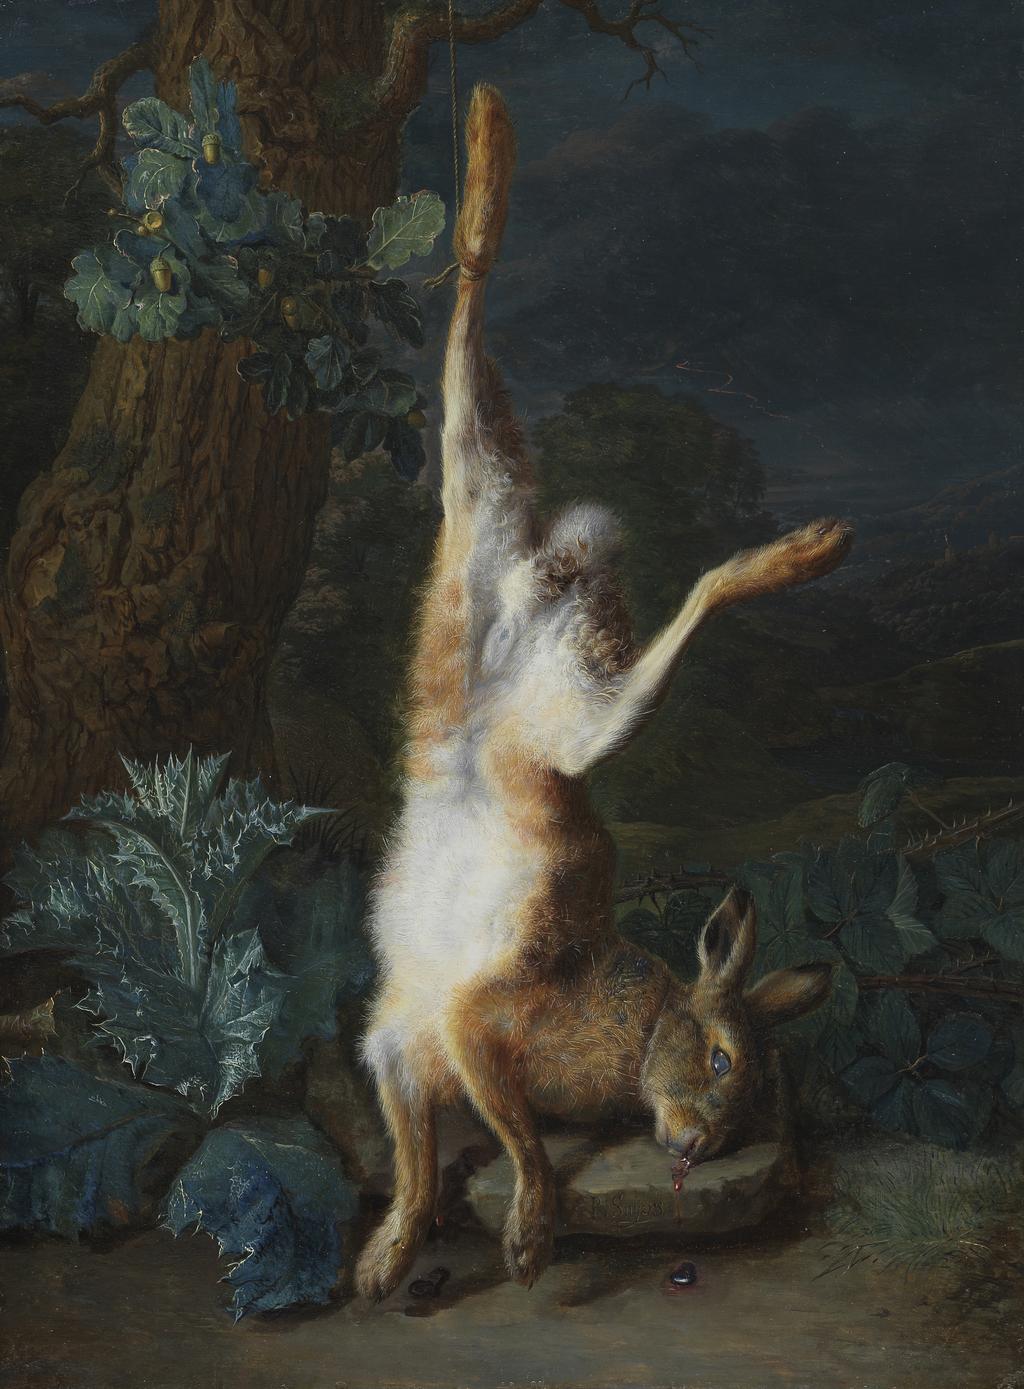 An image of A dead hare. Snyers, Peeter (Flemish, 1681-1752). Oil on copper, height 41.5 cm, width 30.9 cm.